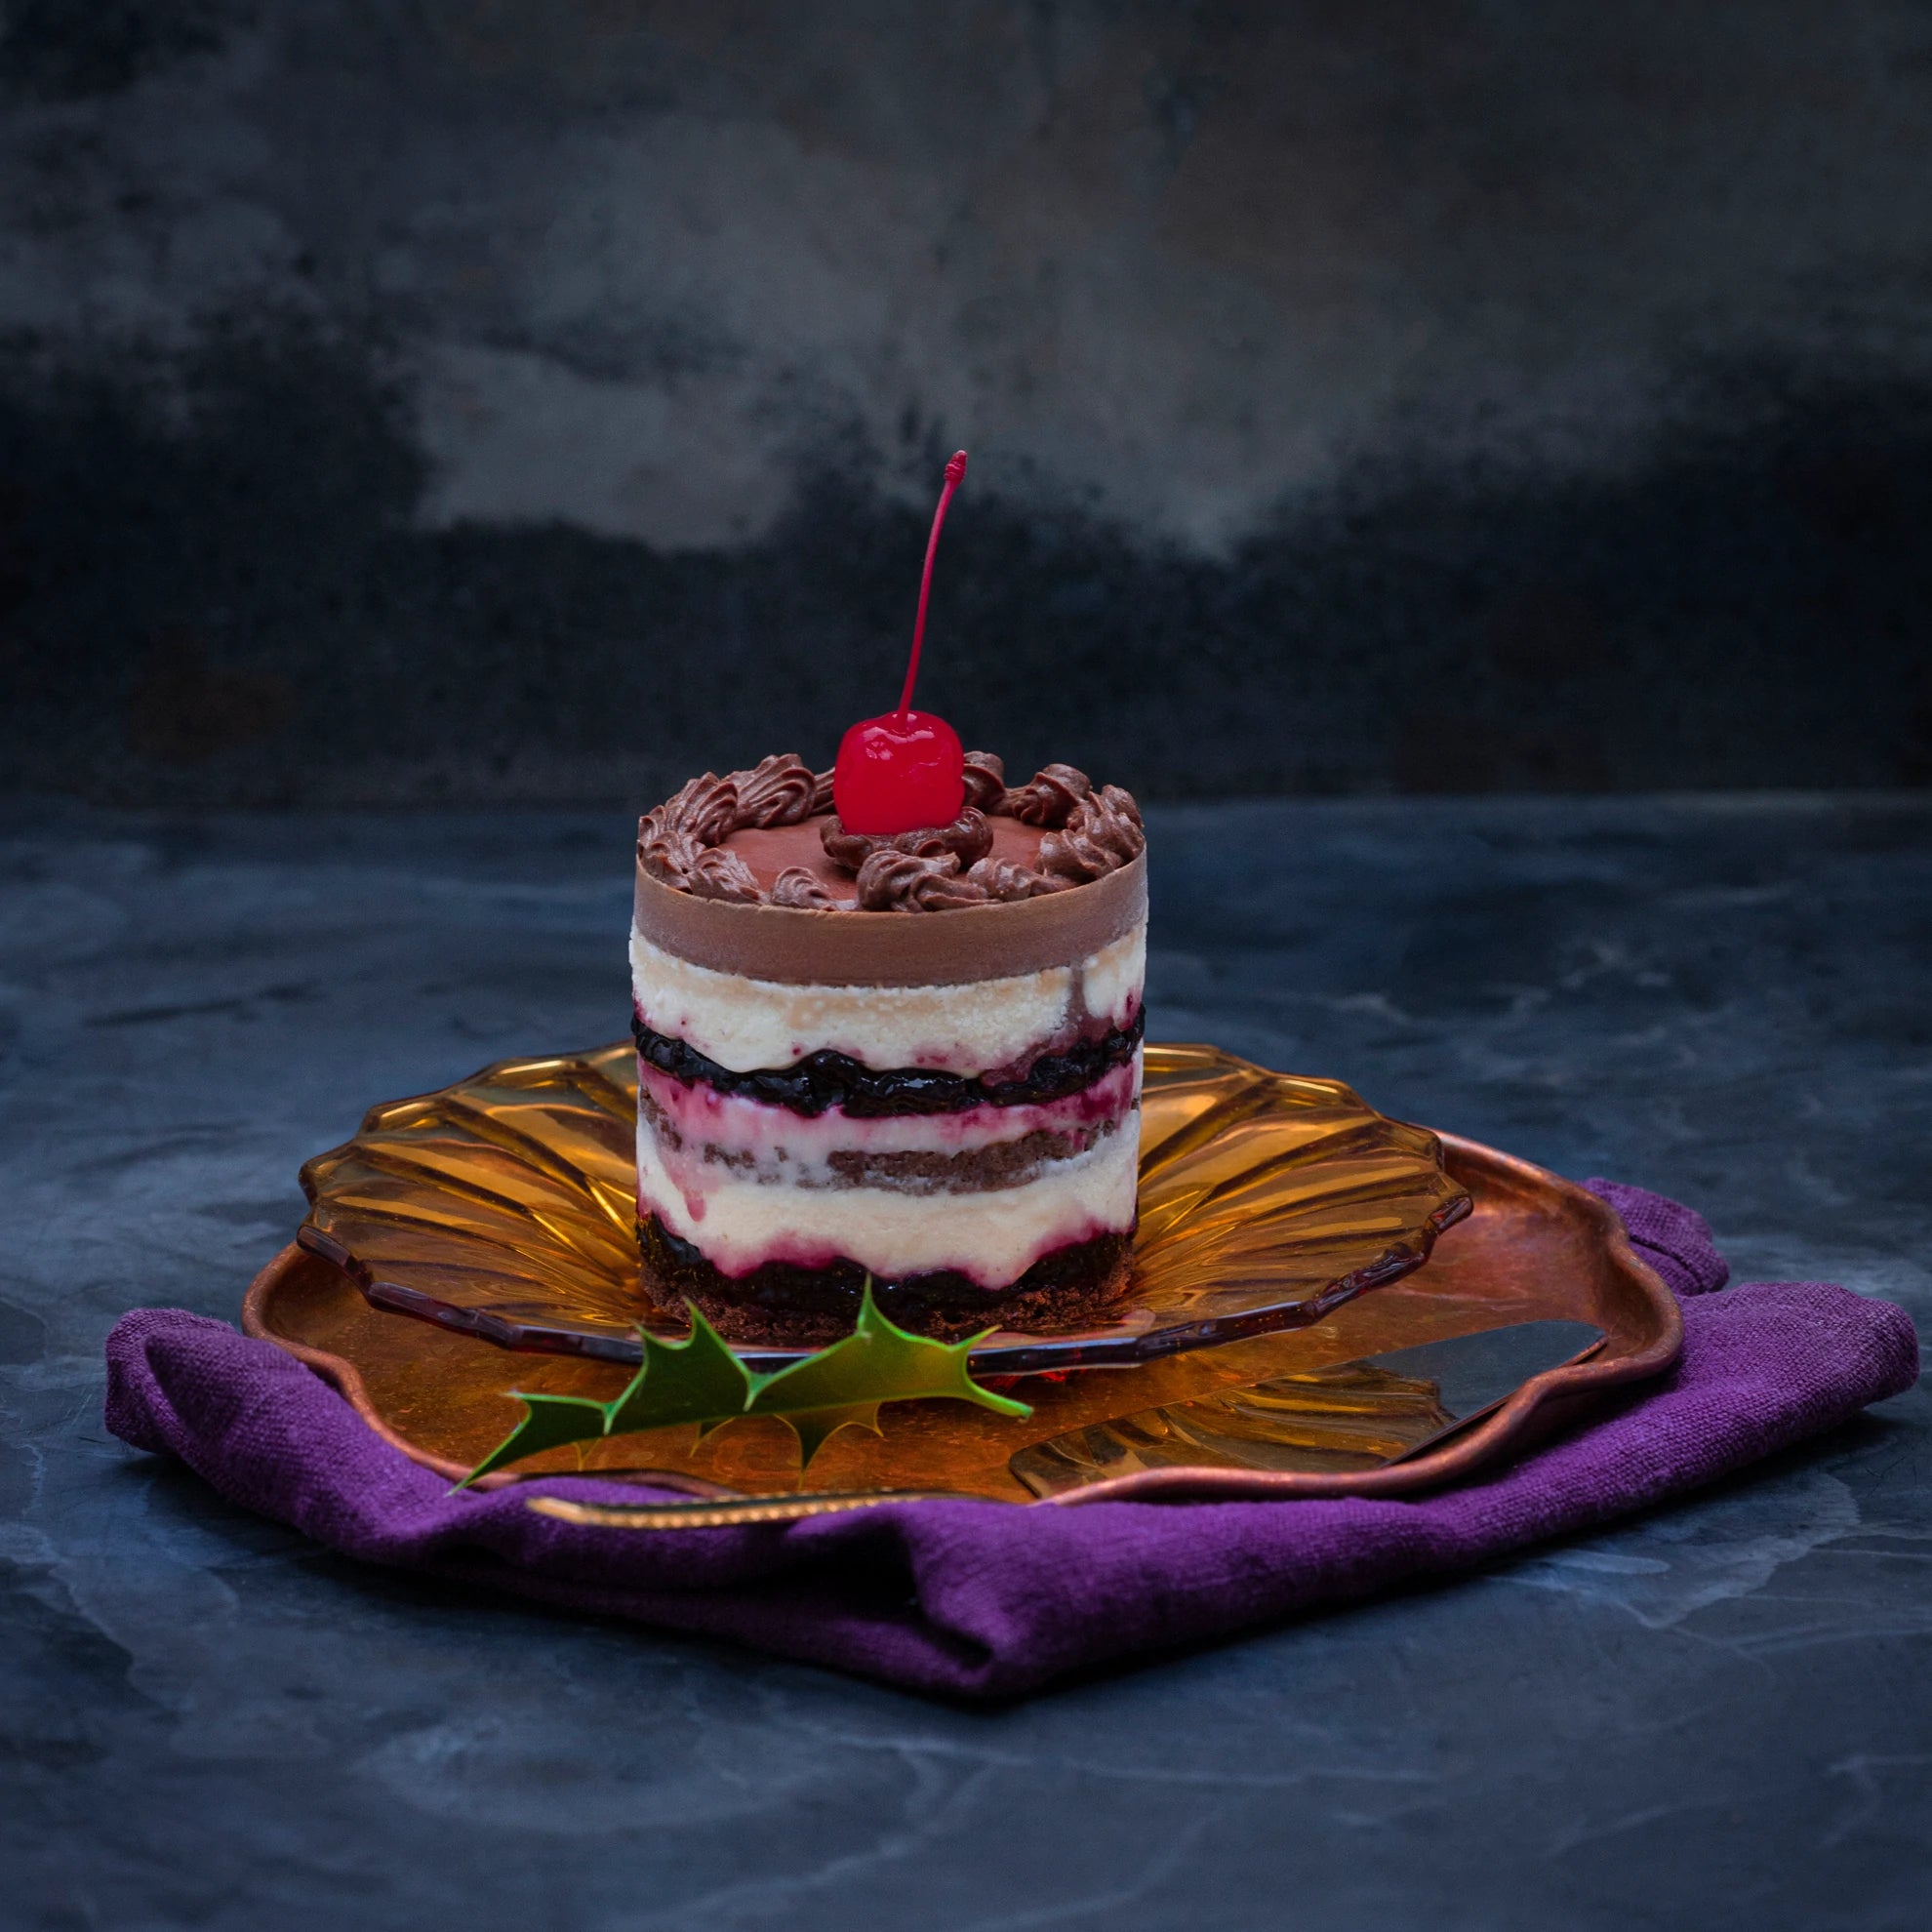 A Black Forest Gateau with a Maraschino cherry on top